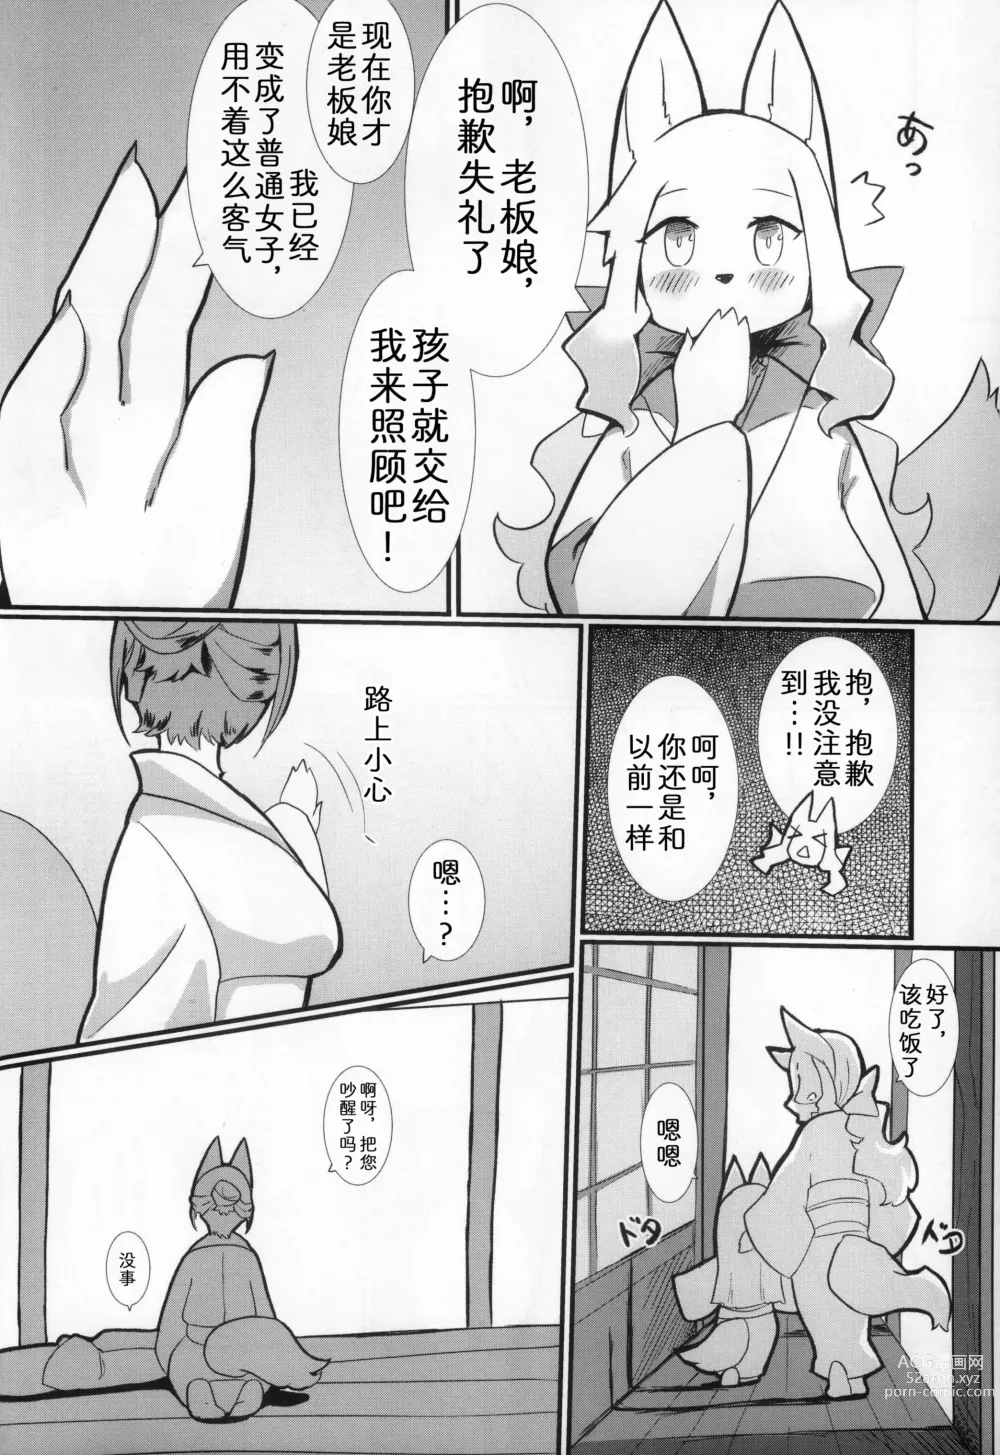 Page 4 of doujinshi 七彩之蝶